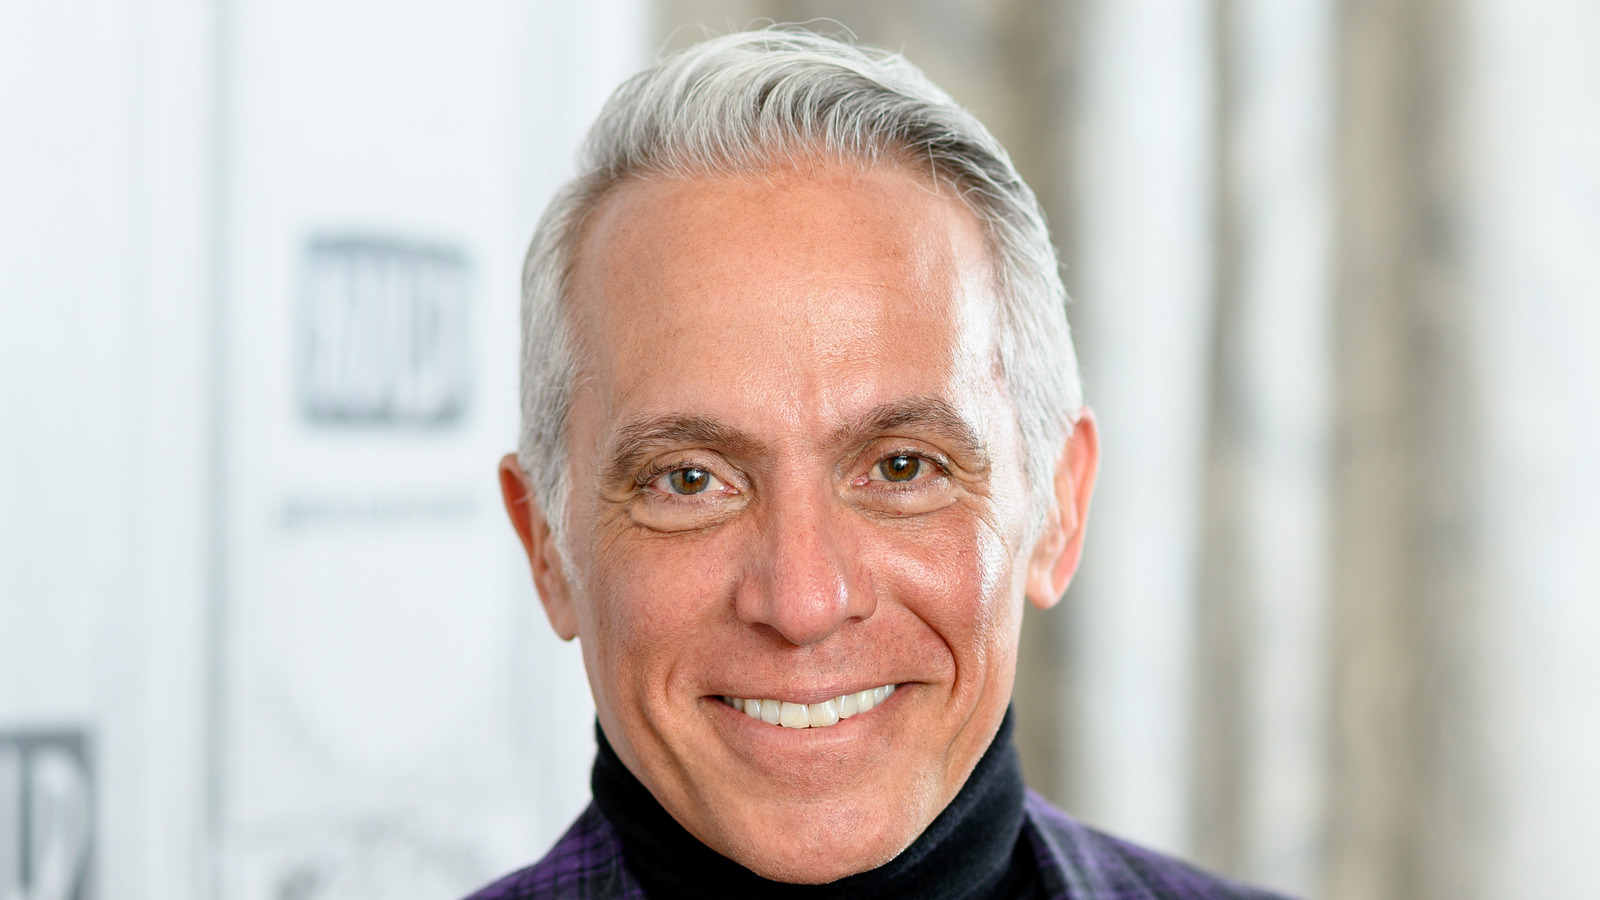 https://www.mashed.com/img/gallery/geoffrey-zakarian-talks-cooking-shows-and-his-best-cooking-tips-exclusive-interview/l-intro-1624391441.jpg